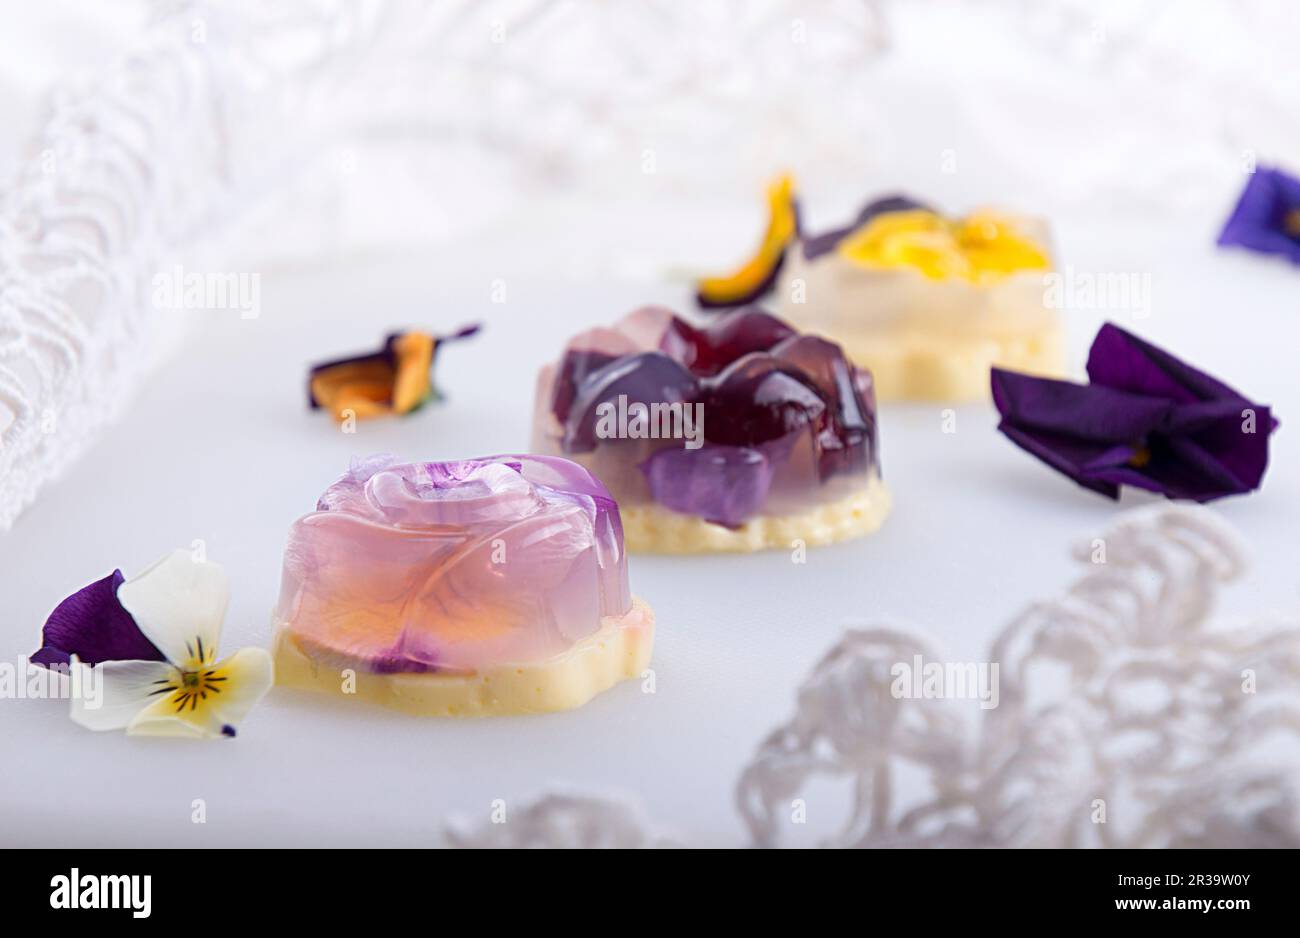 Unique japanese dessert Havaro of jelly and bavarian cream with edible violet flowers Stock Photo